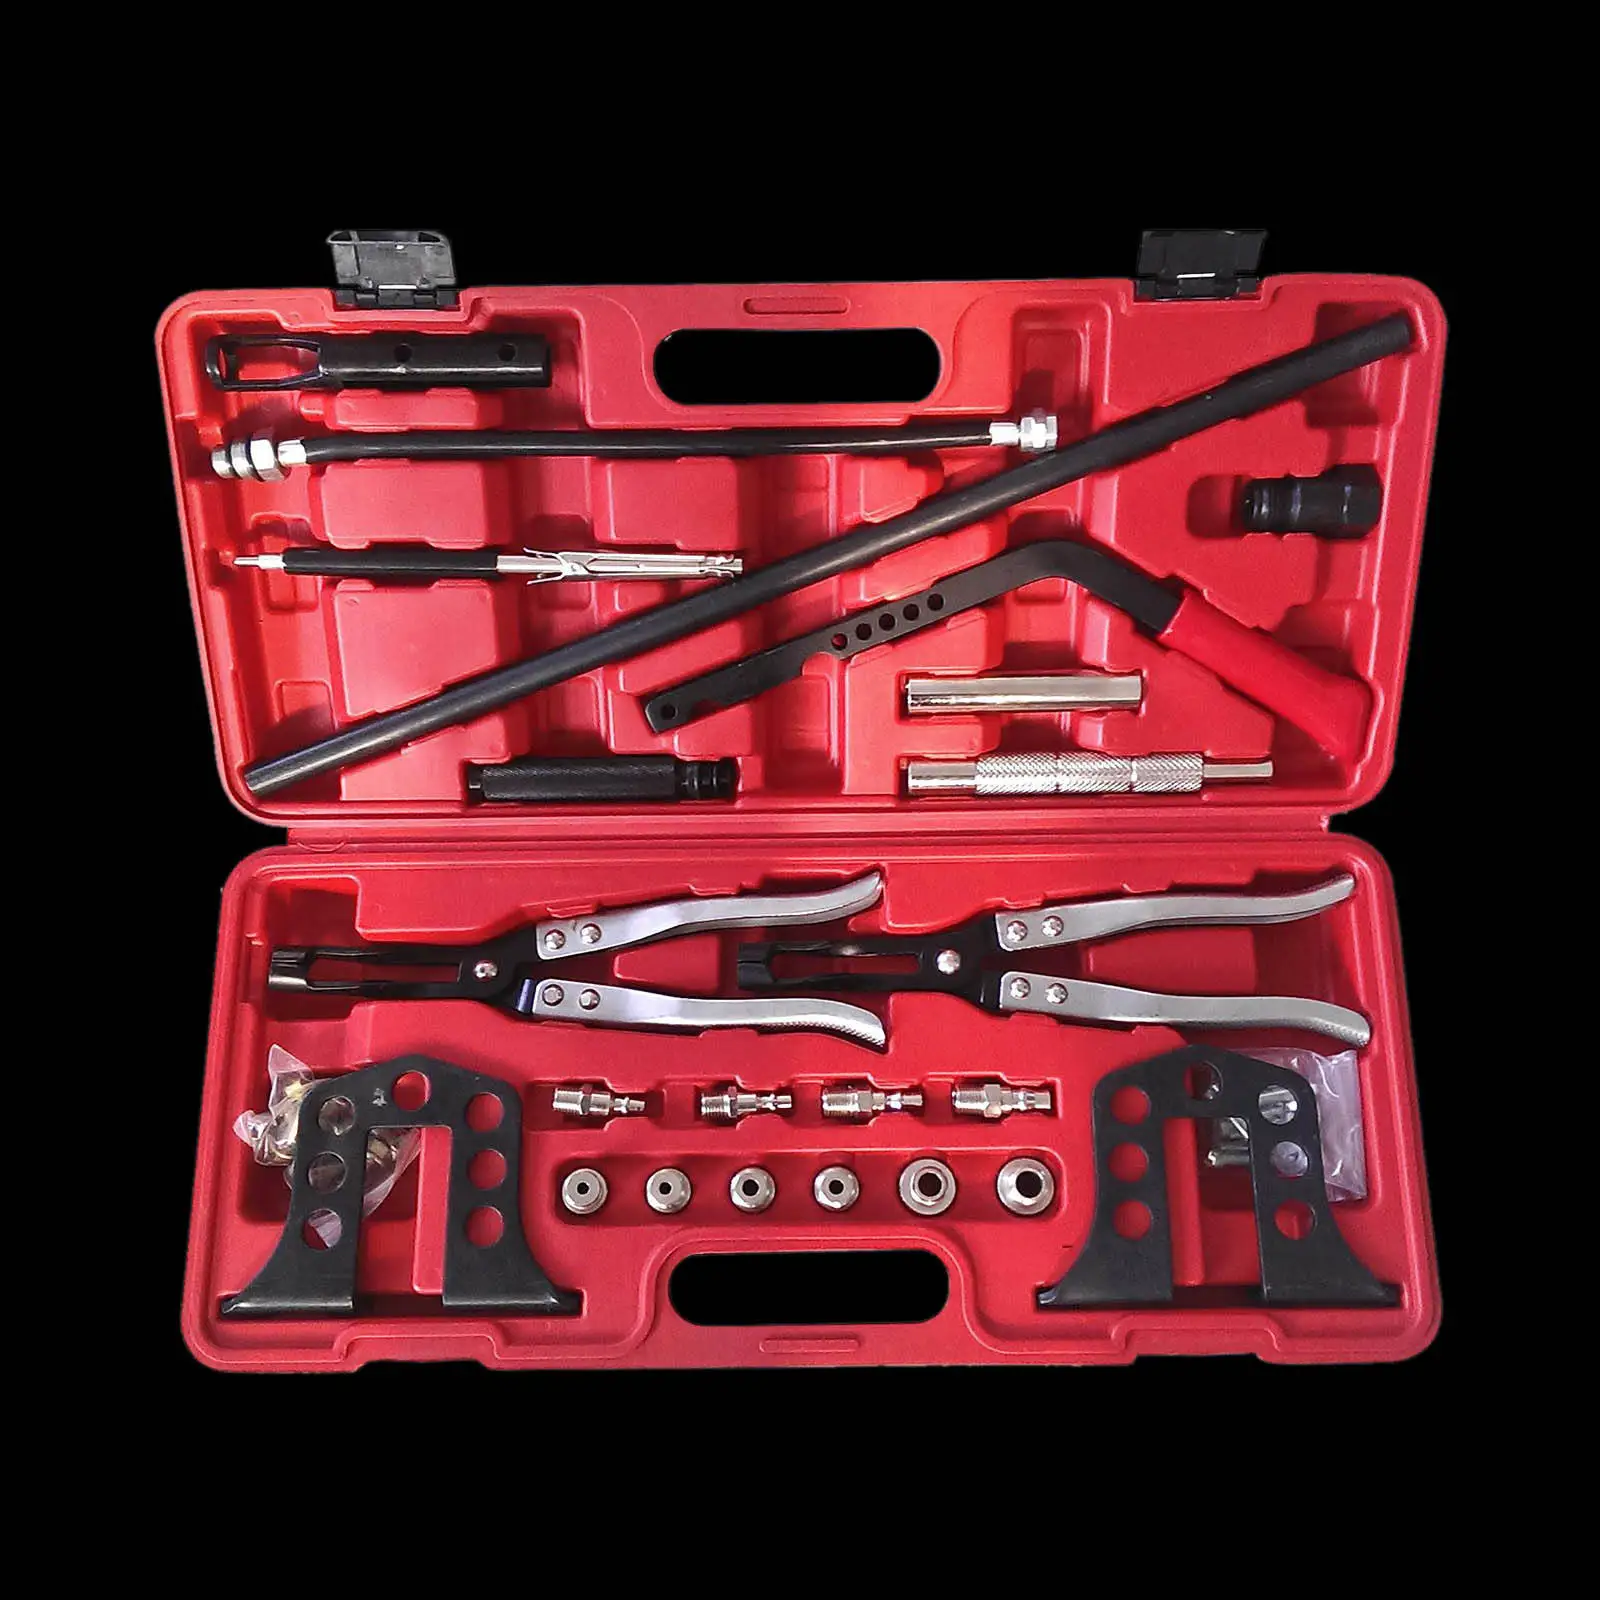 Pro Cylinder Head Service Tool, For Valve Springs Guides Bushes Stem Seals Set, Fit for 8 16 and 24 Valve Engines Tools